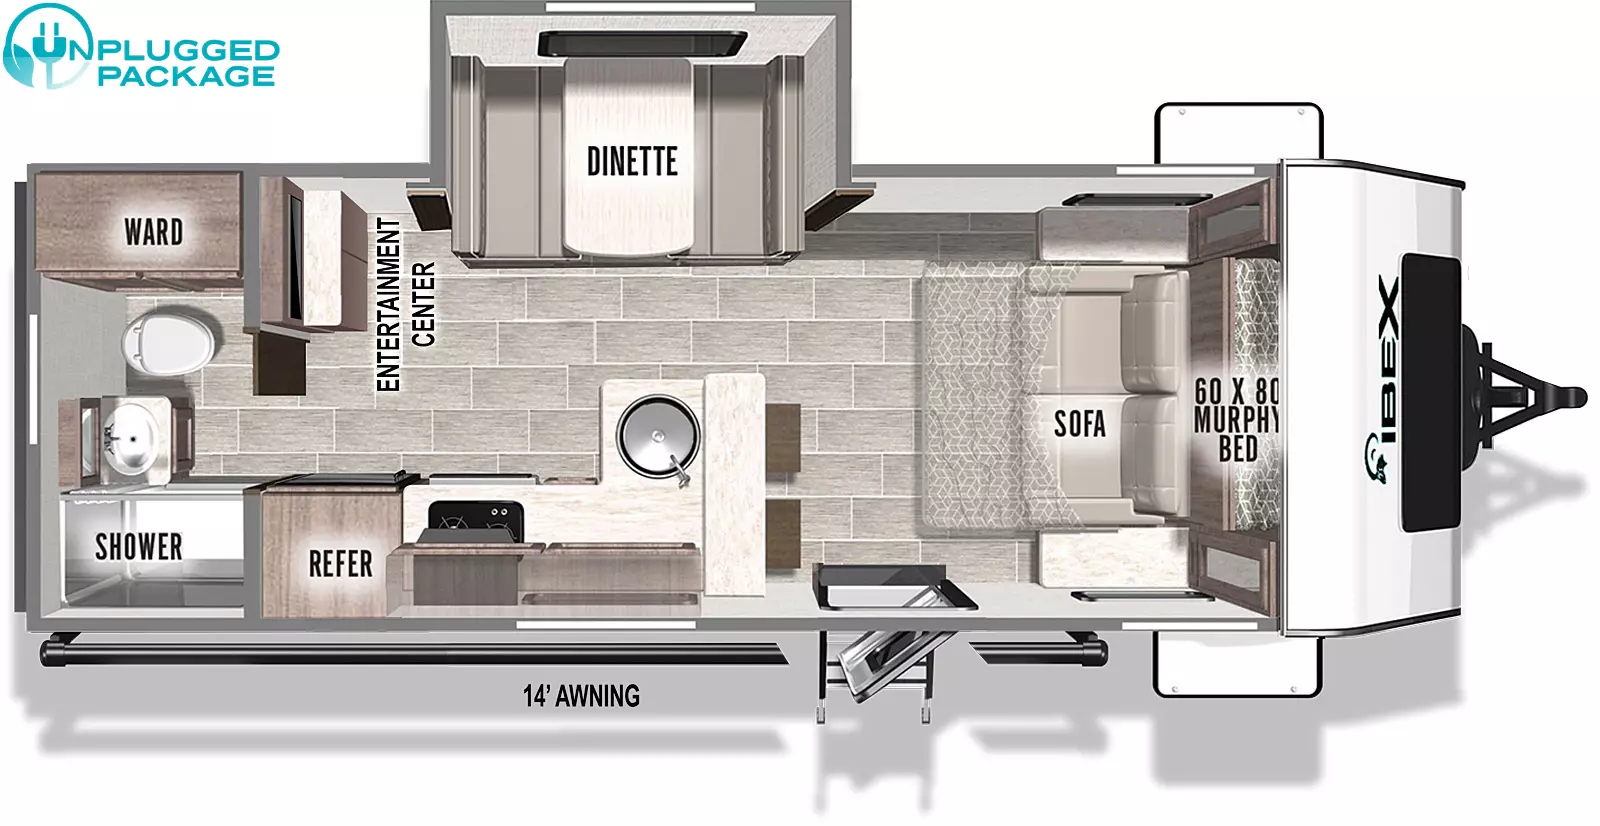 The 20MDS has one slideout and one entry. Exterior features include a 14 foot awning. Interior layout front to back: murphy bed sofa; off-door side slideout with dinette; door side entry and peninsula kitchen counter with barstools and sink that wrap to kitchen and refrigerator; off-door side entertainment center along inner wall; rear full bathroom with wardrobe.